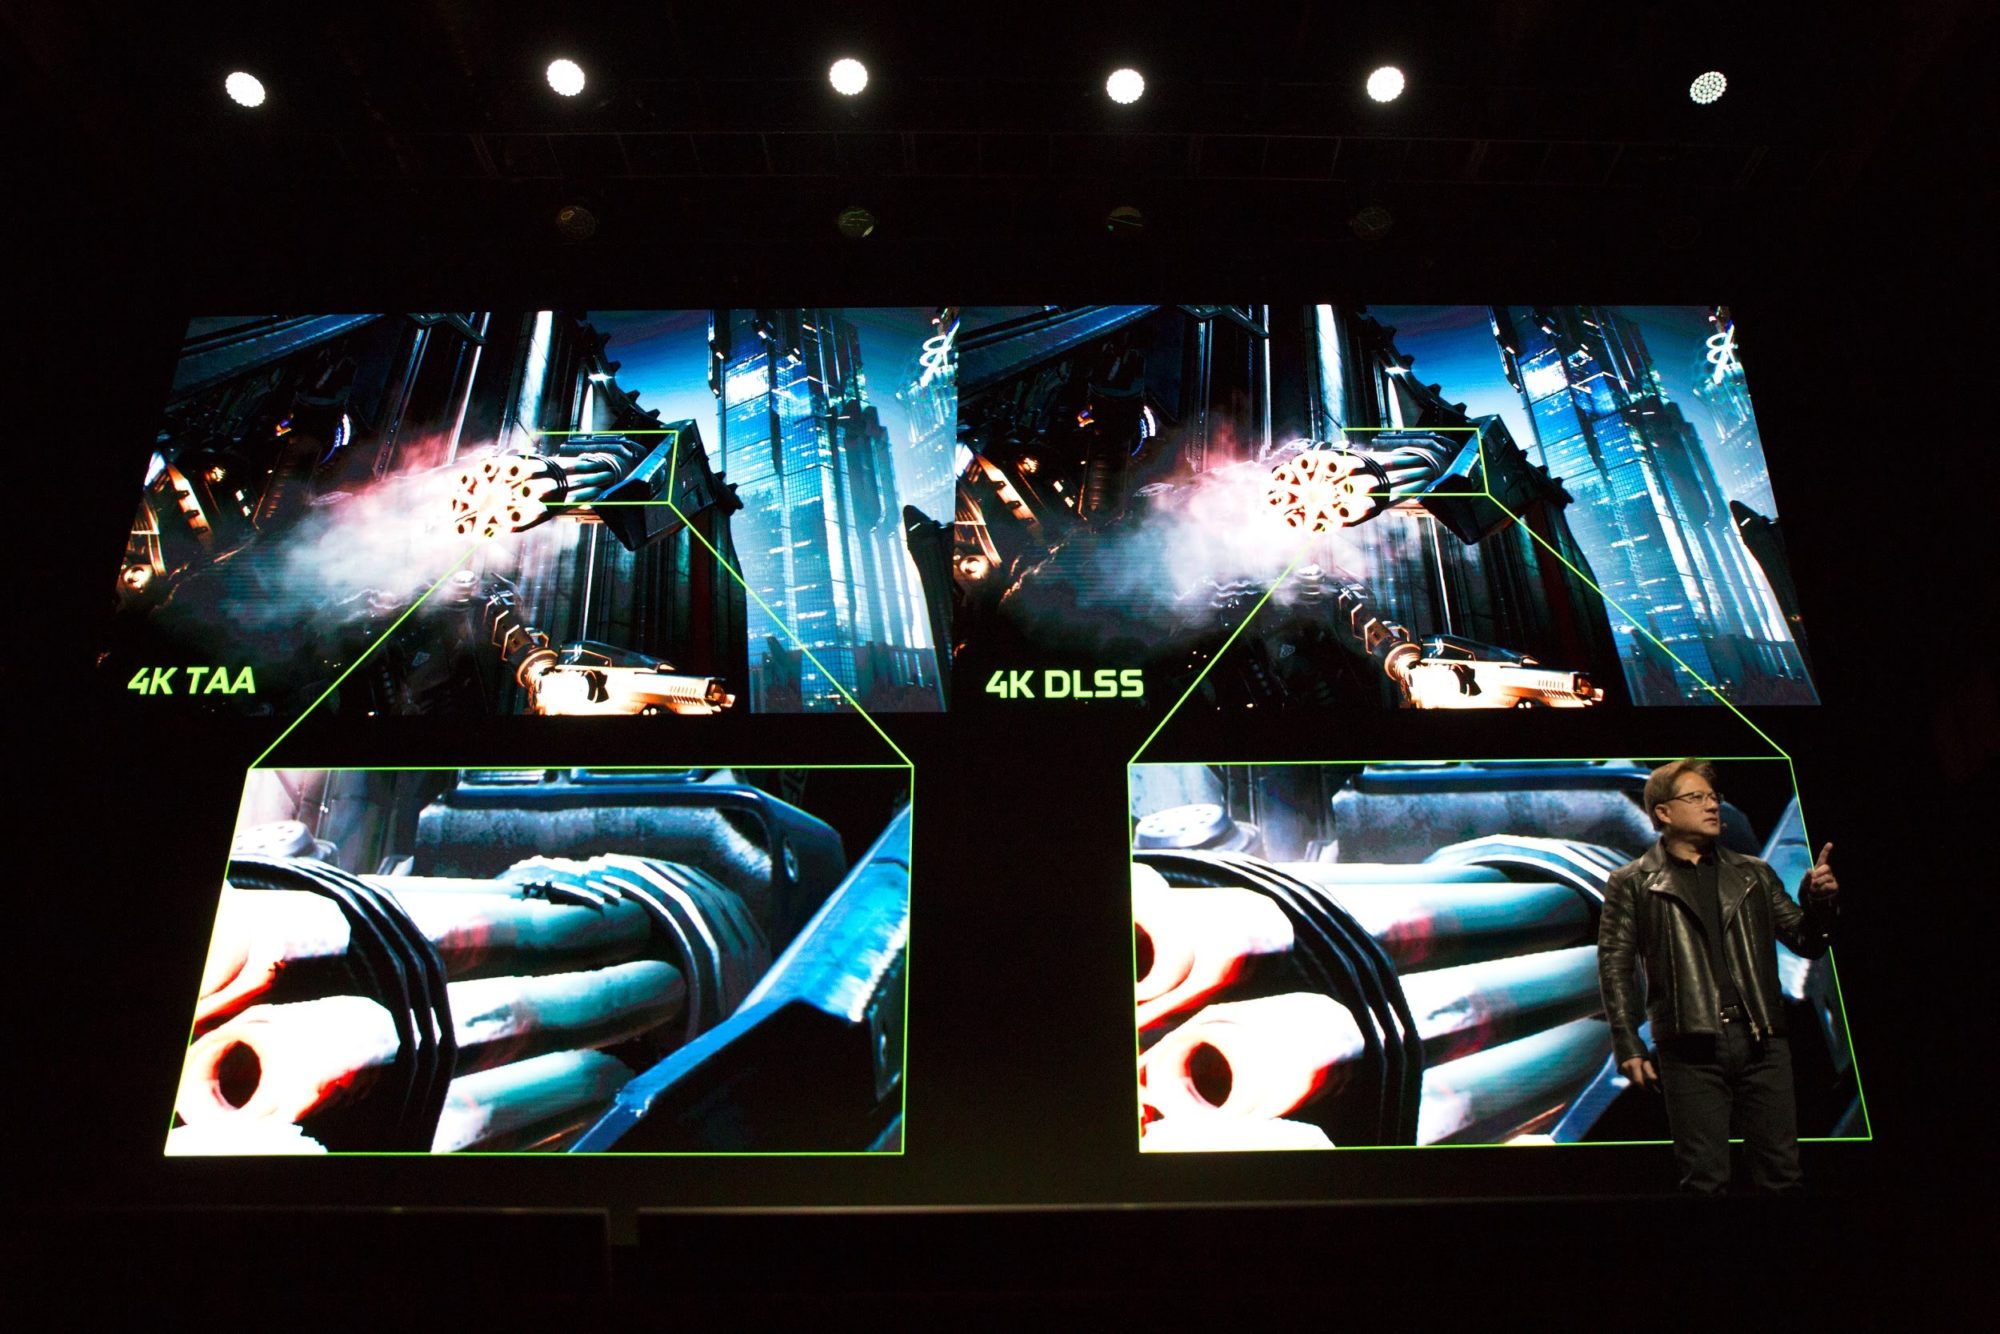 Databasen semester syg GeForce RTX Propels PC Gaming's Golden Age with Real-Time Ray Tracing |  NVIDIA Blog